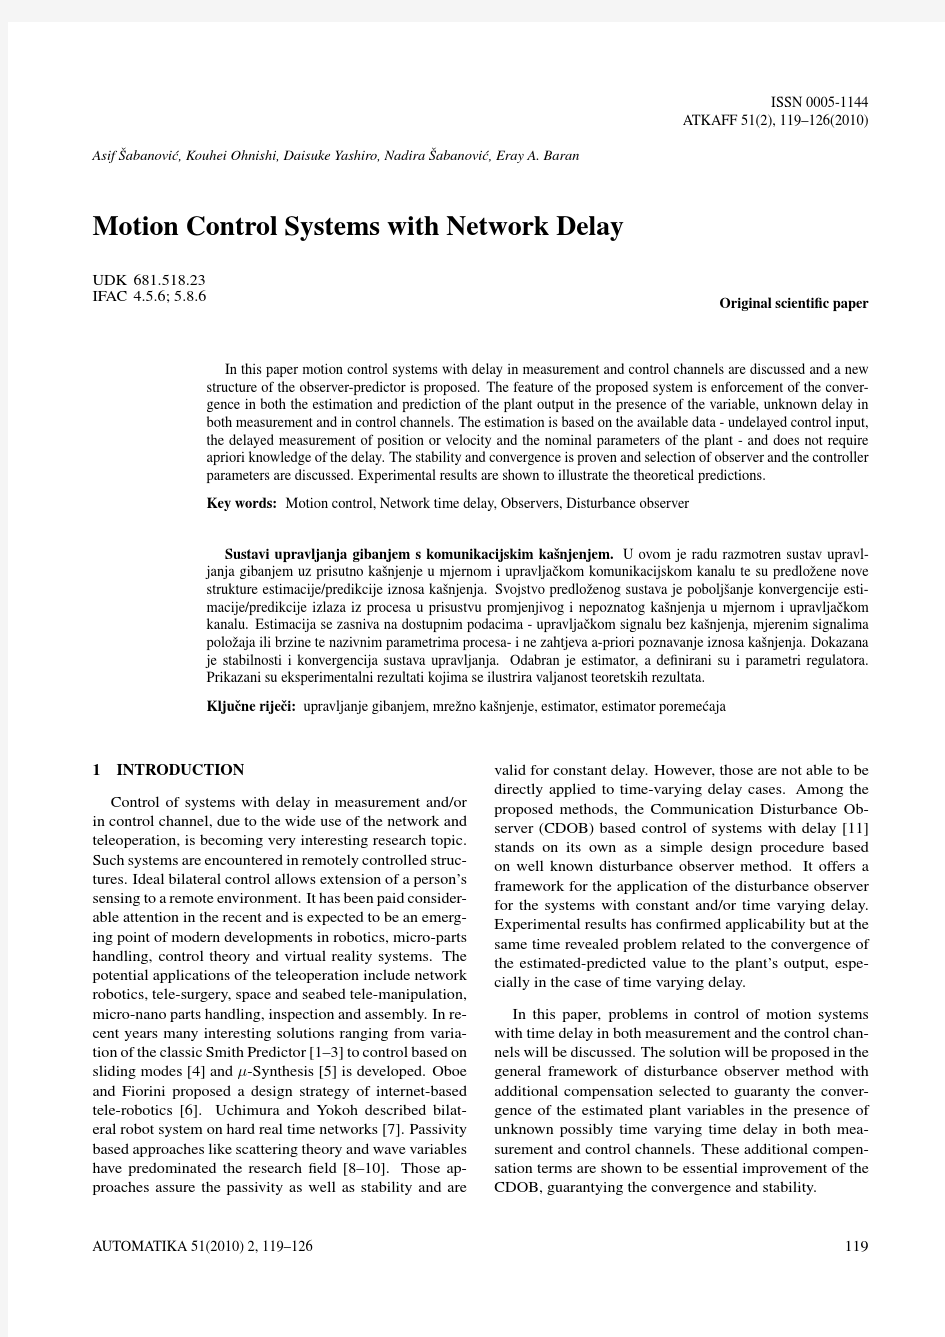 Motion Control Systems With Network Delay